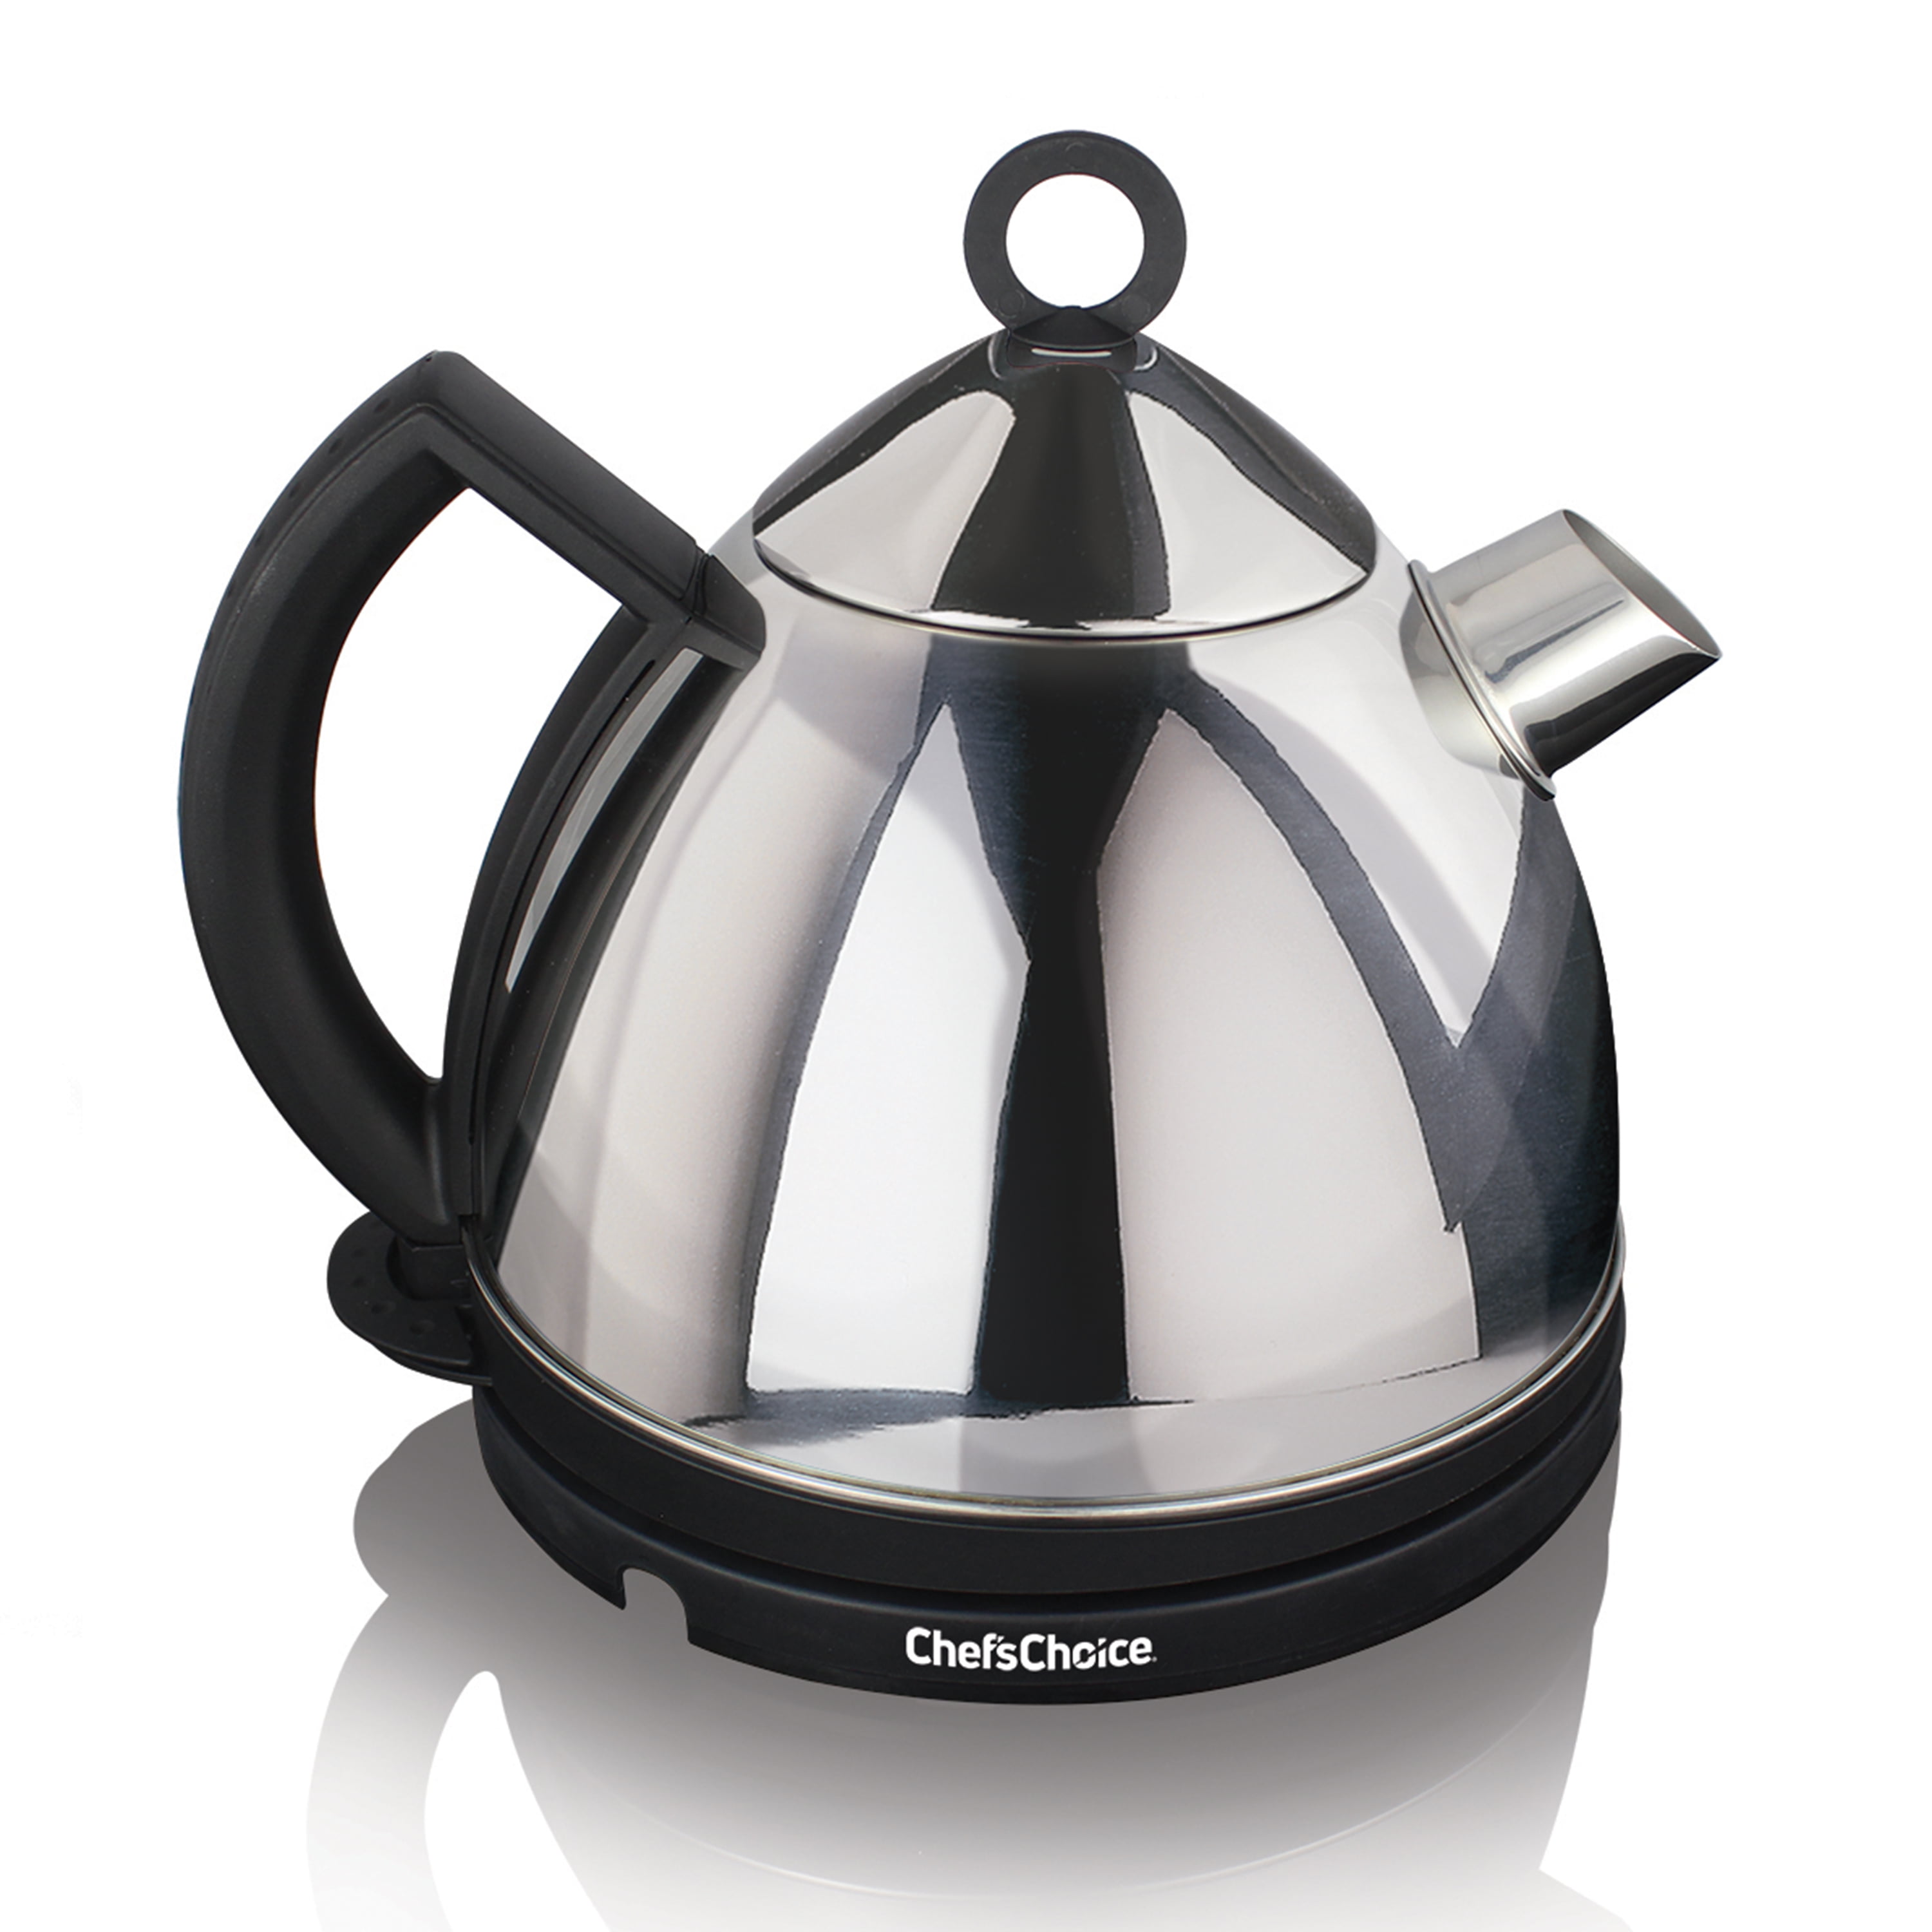 Chefs Choice Electric Kettle